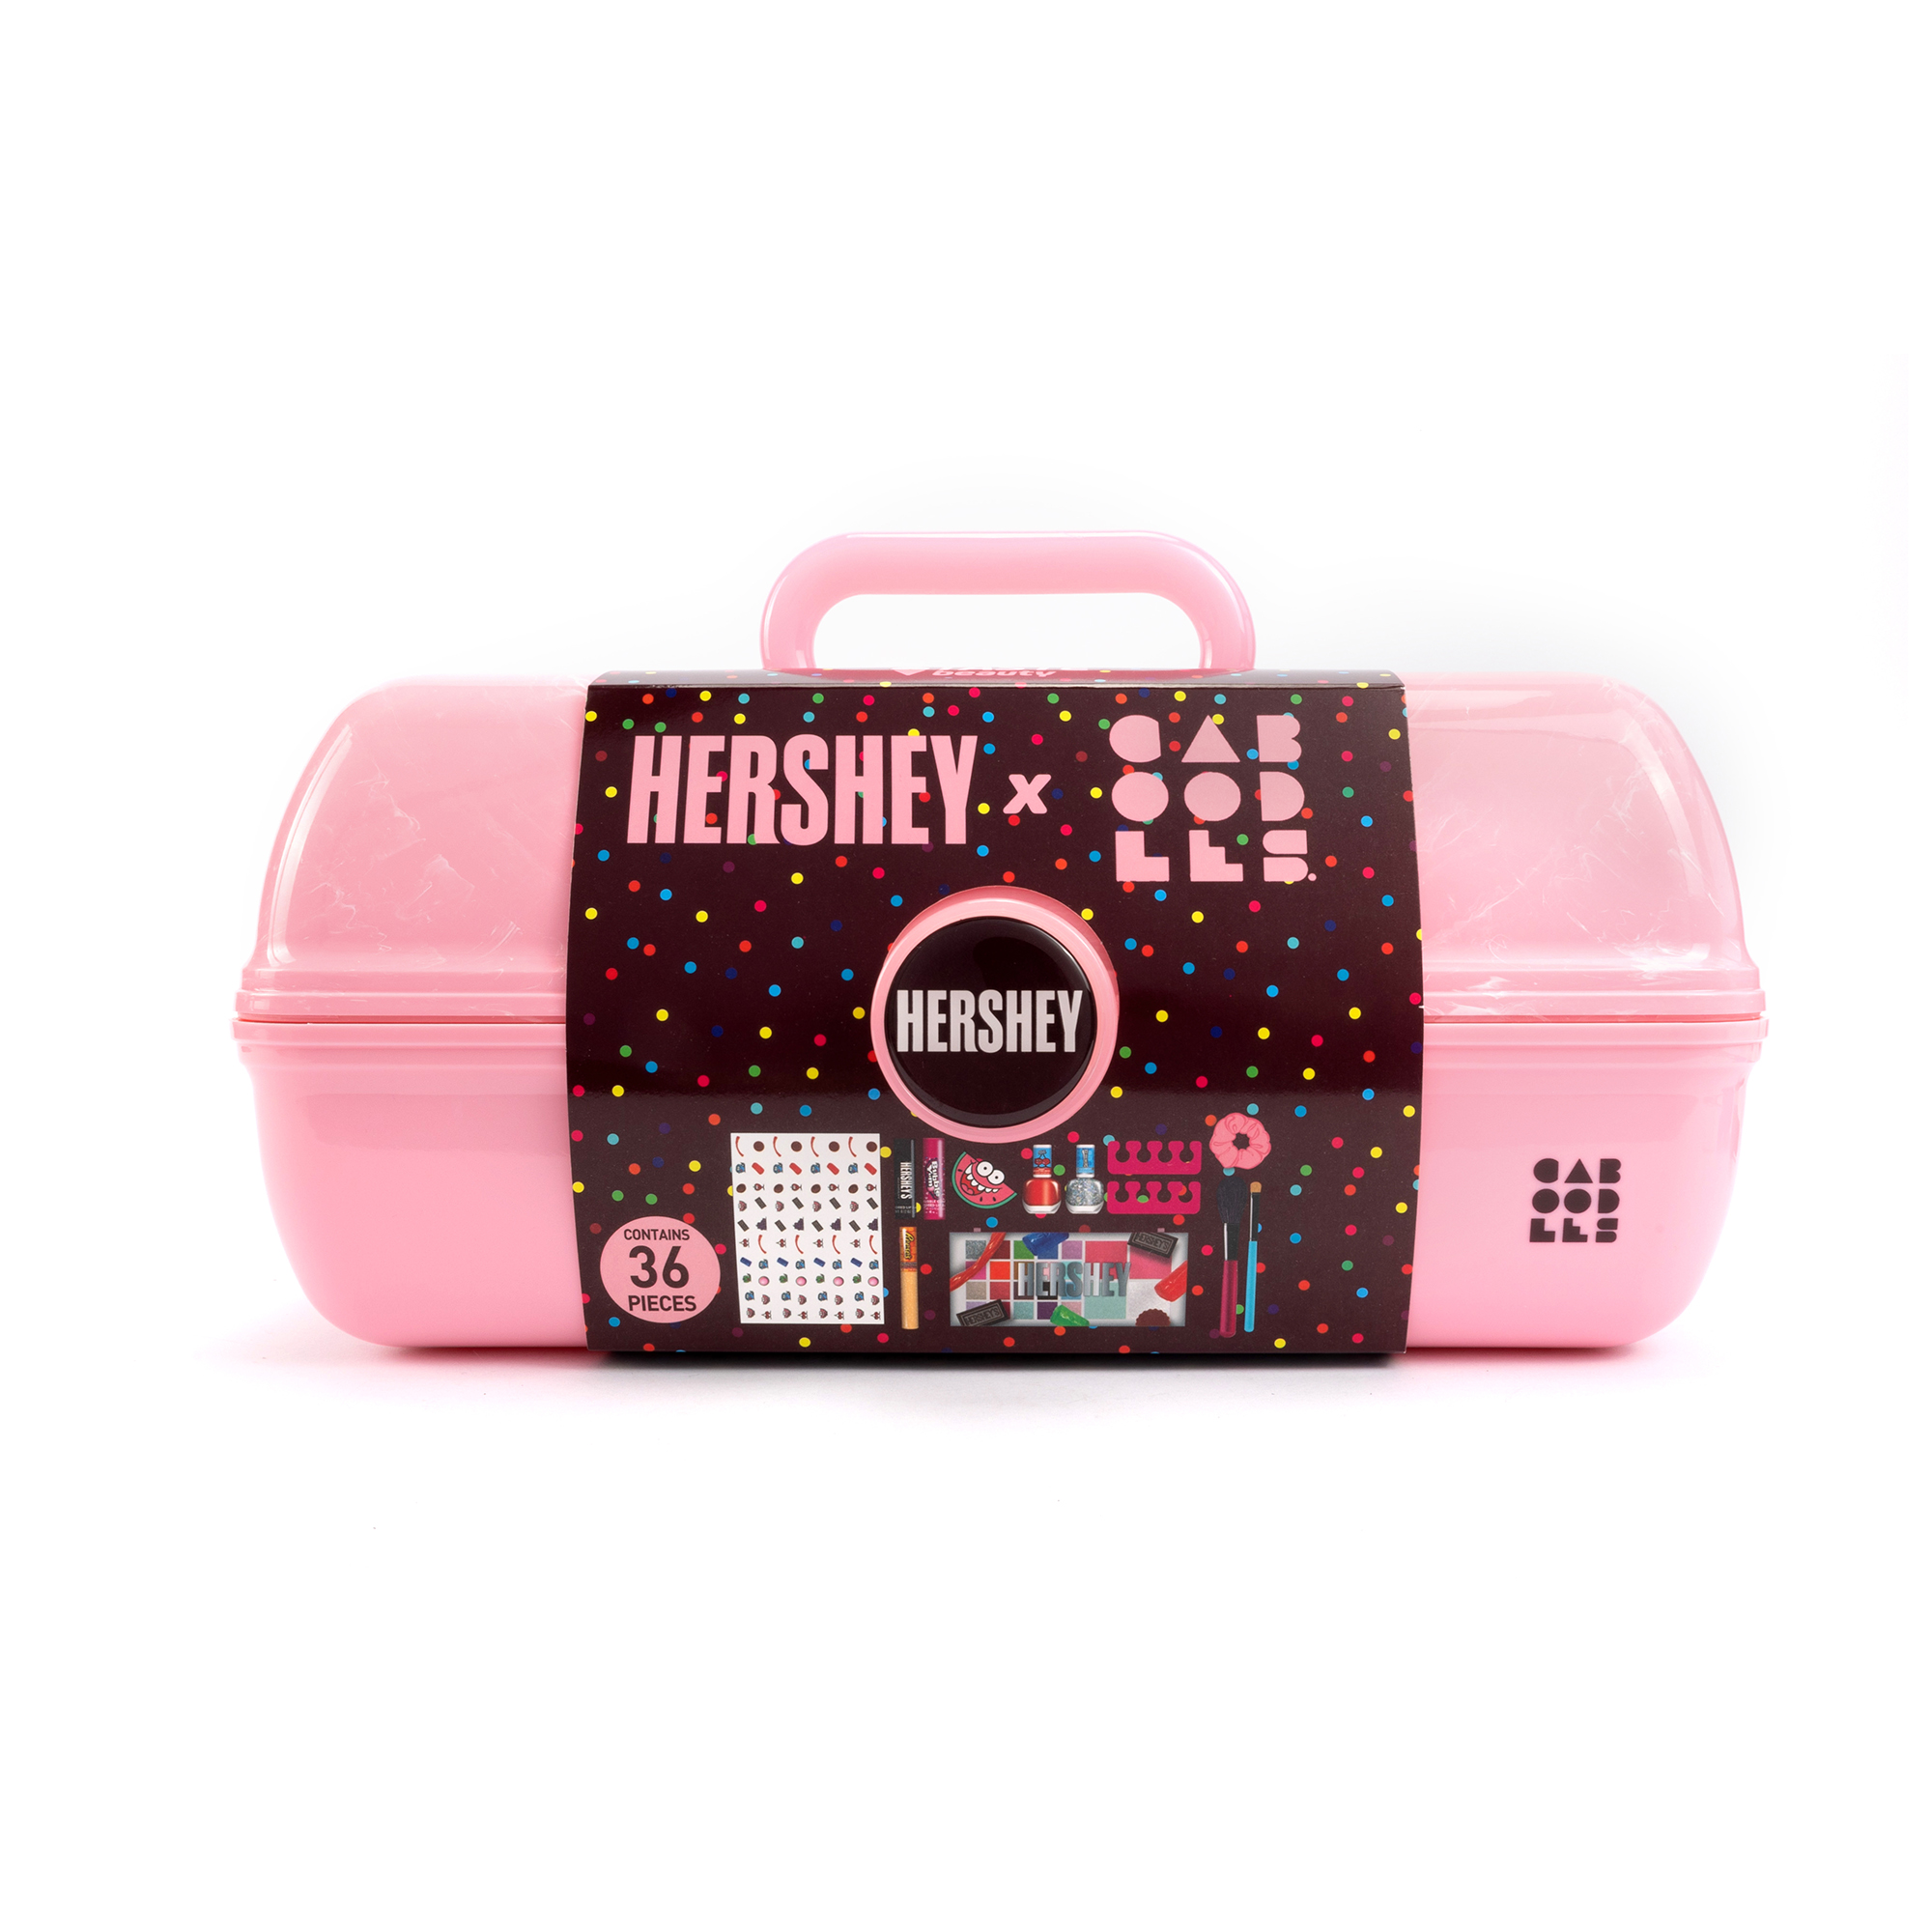 Caboodles x Taste Beauty x Hershey's On The Go Girl Cosmetic case with 13 piece cosmetic set - image 2 of 6